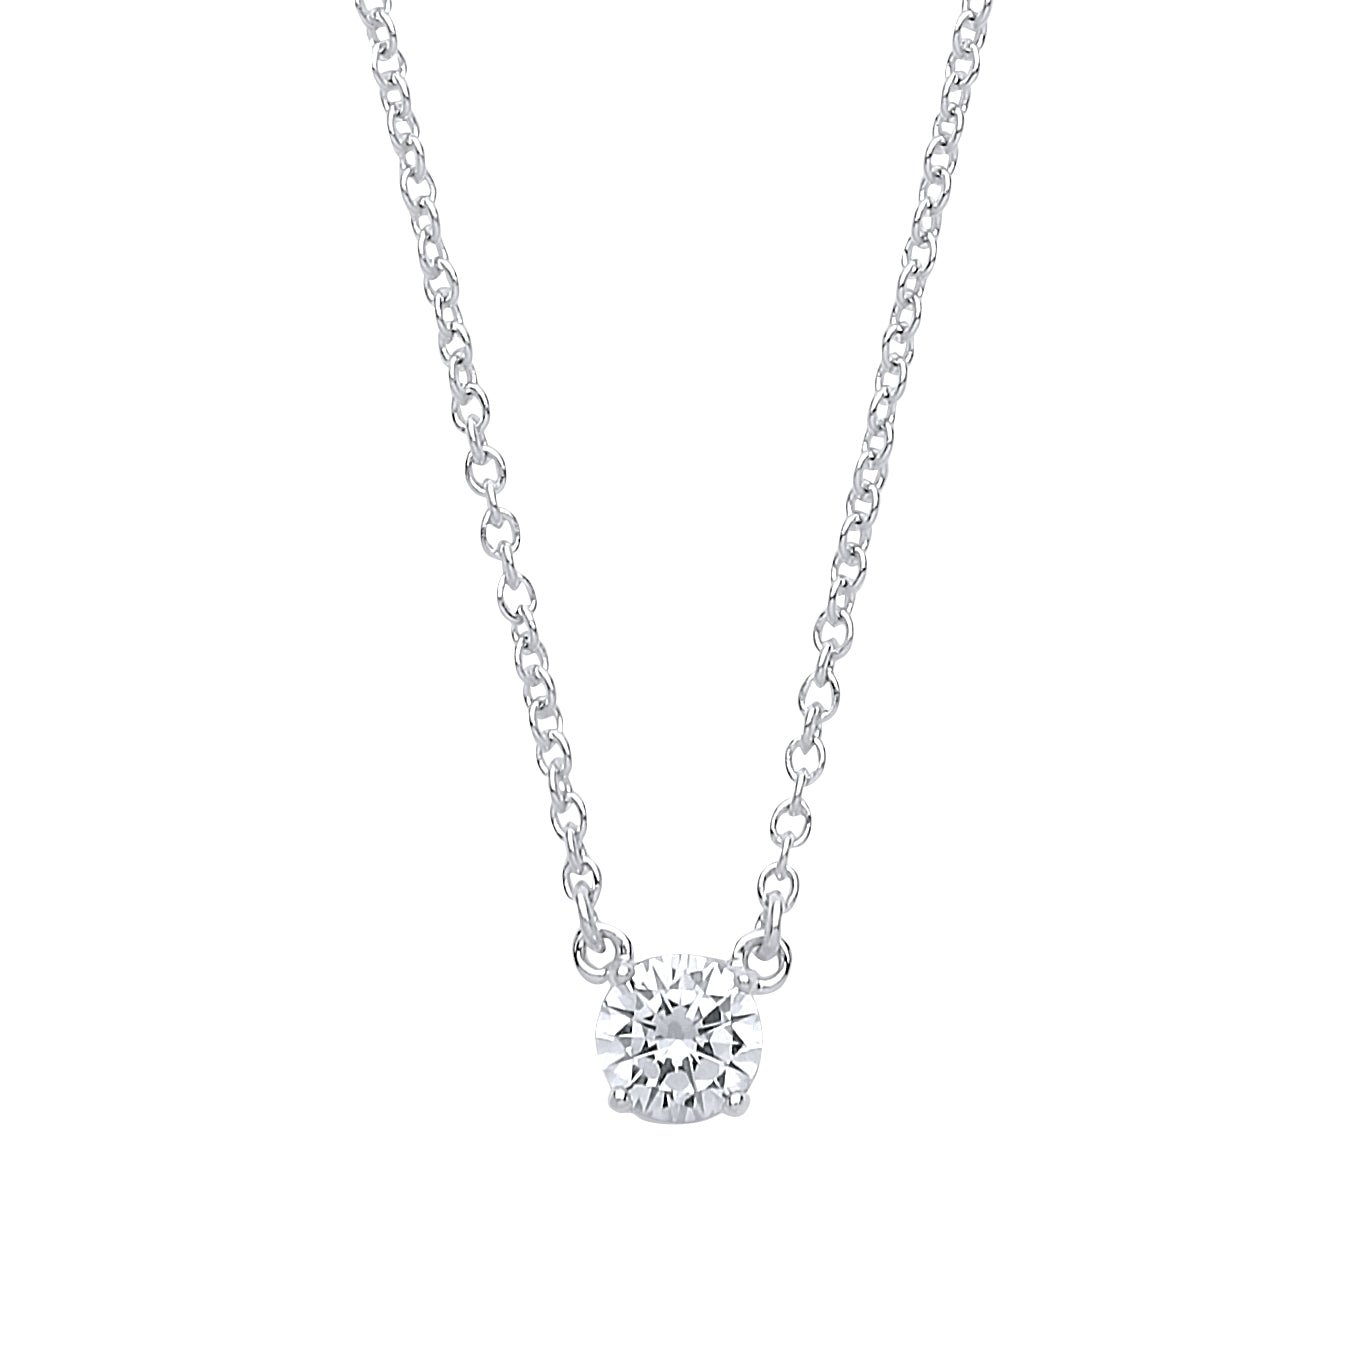 Silver  CZ Solitaire Charm Necklace 1.6mm 16 + 2 inch - GVK156